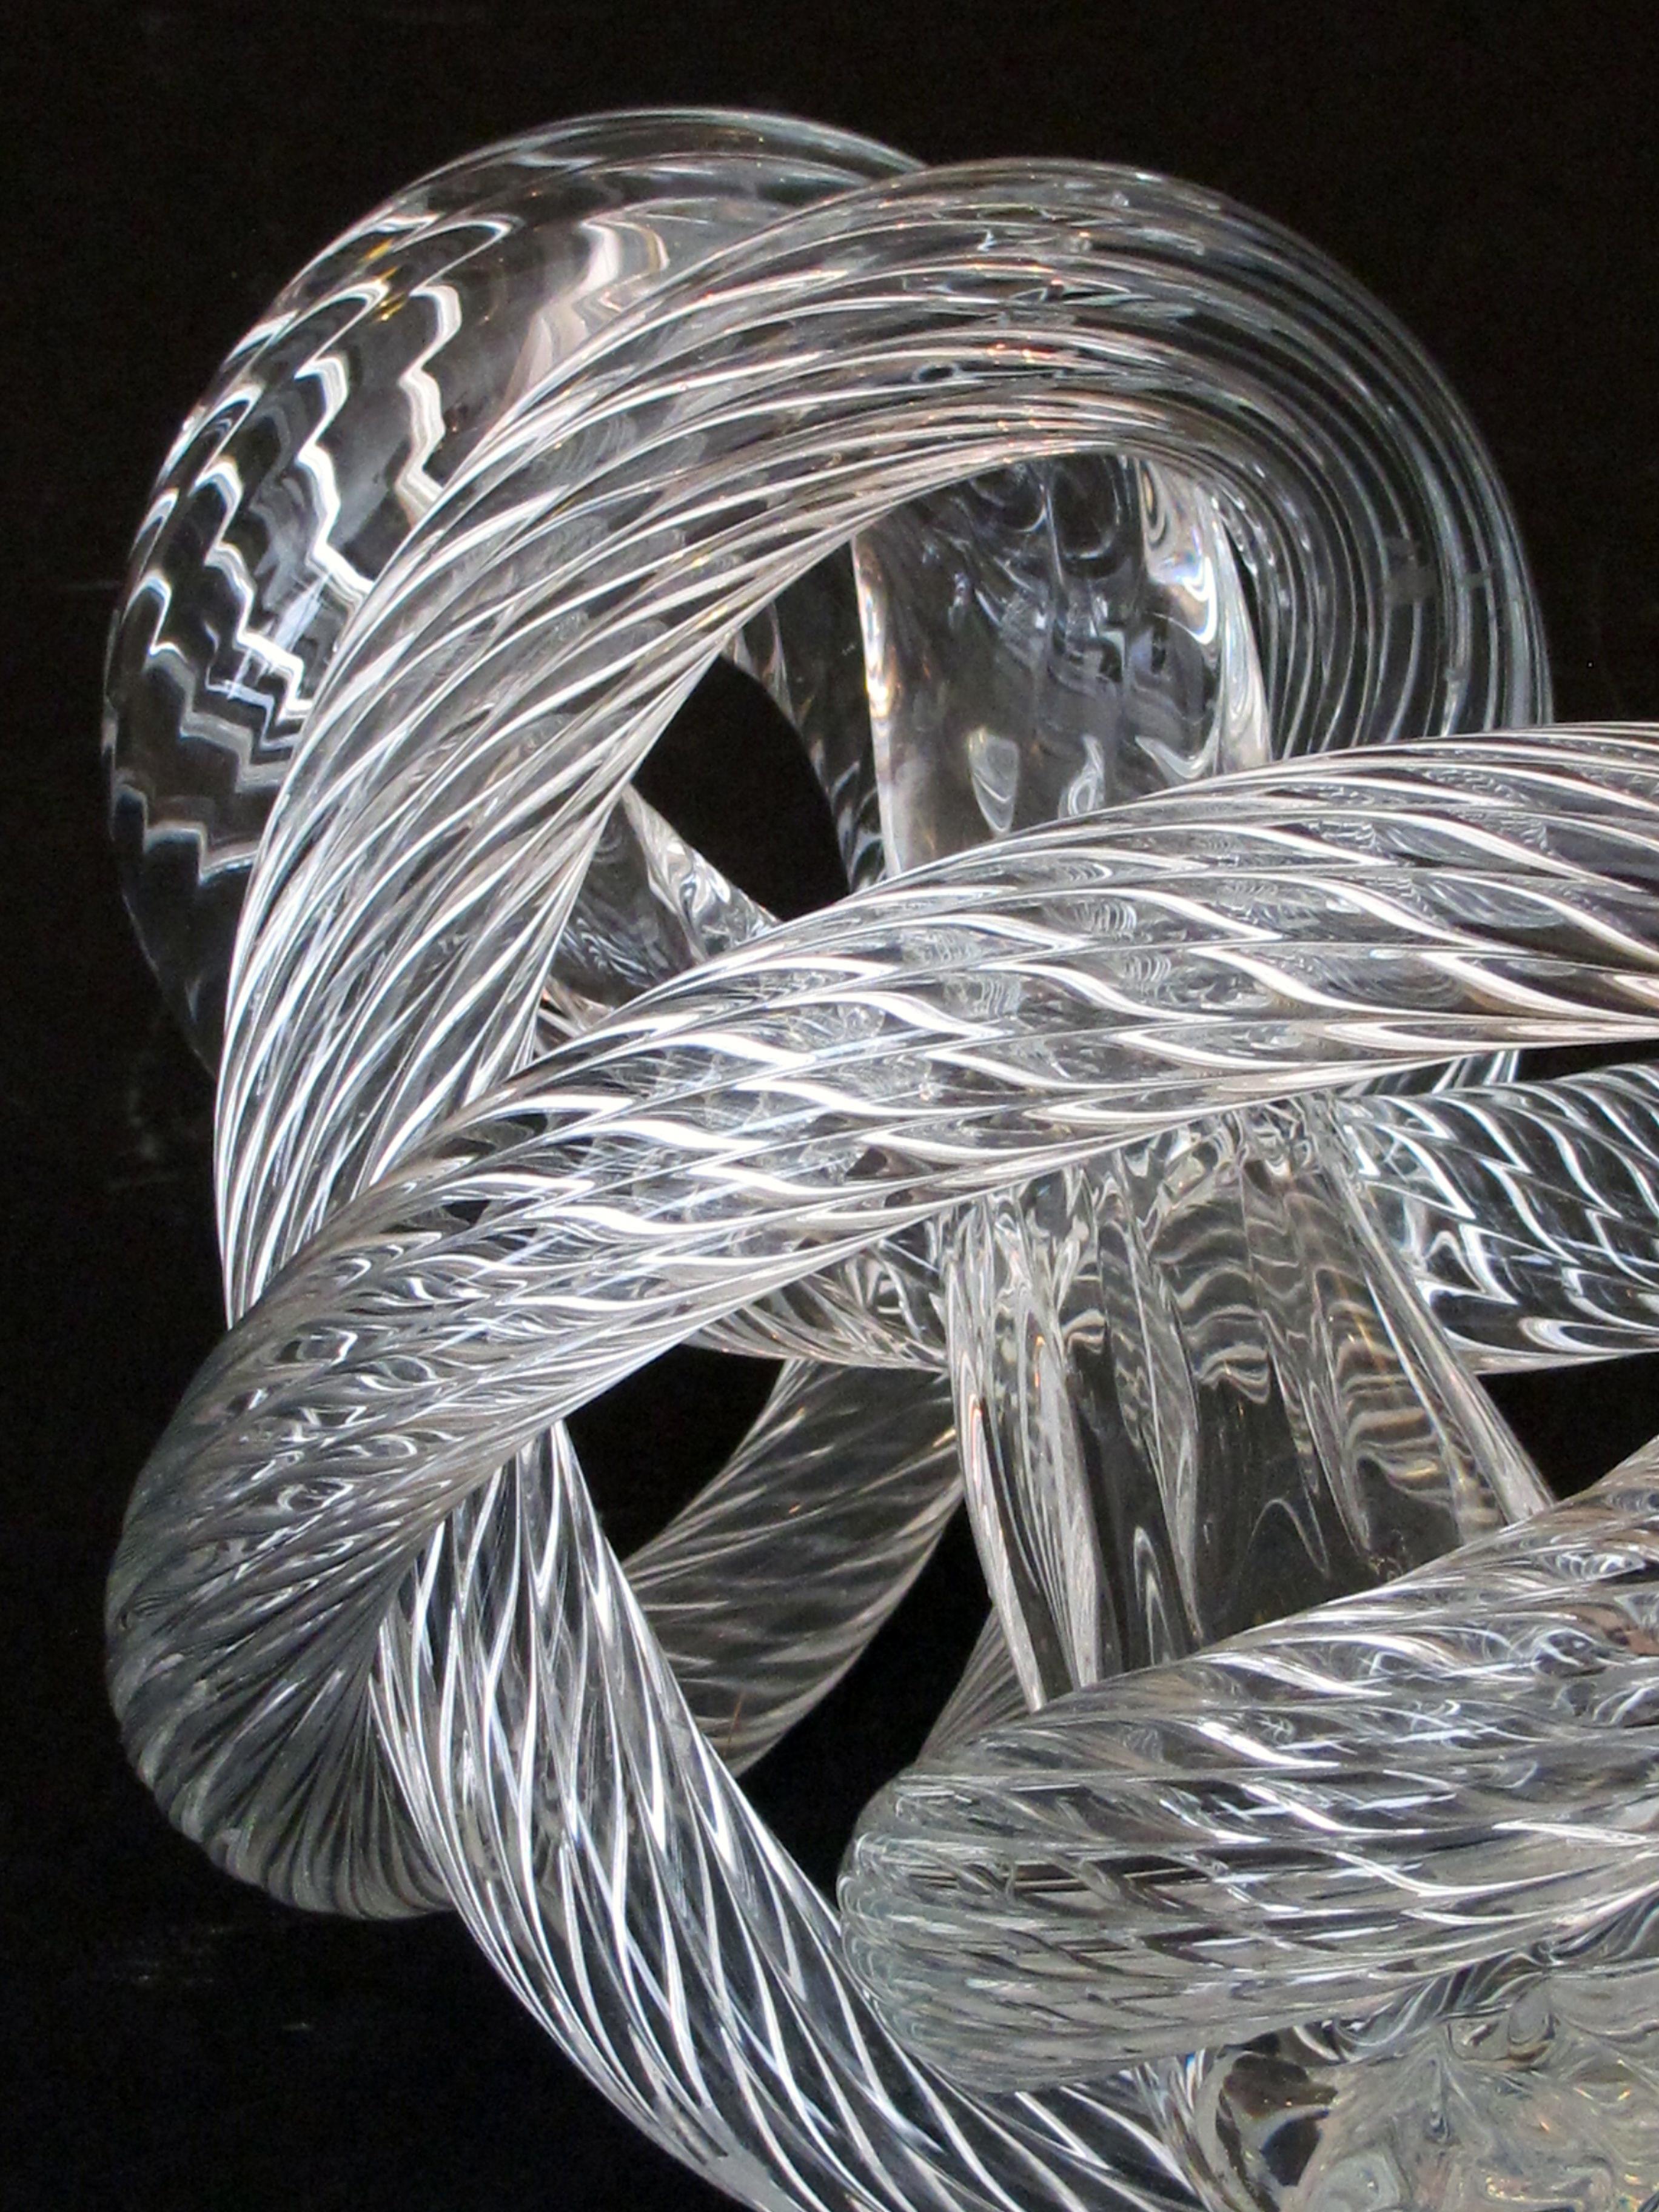 Modern Well-Crafted and Heavy Glass Rope Knot by Fusion Z Glassworks; Etched Signature